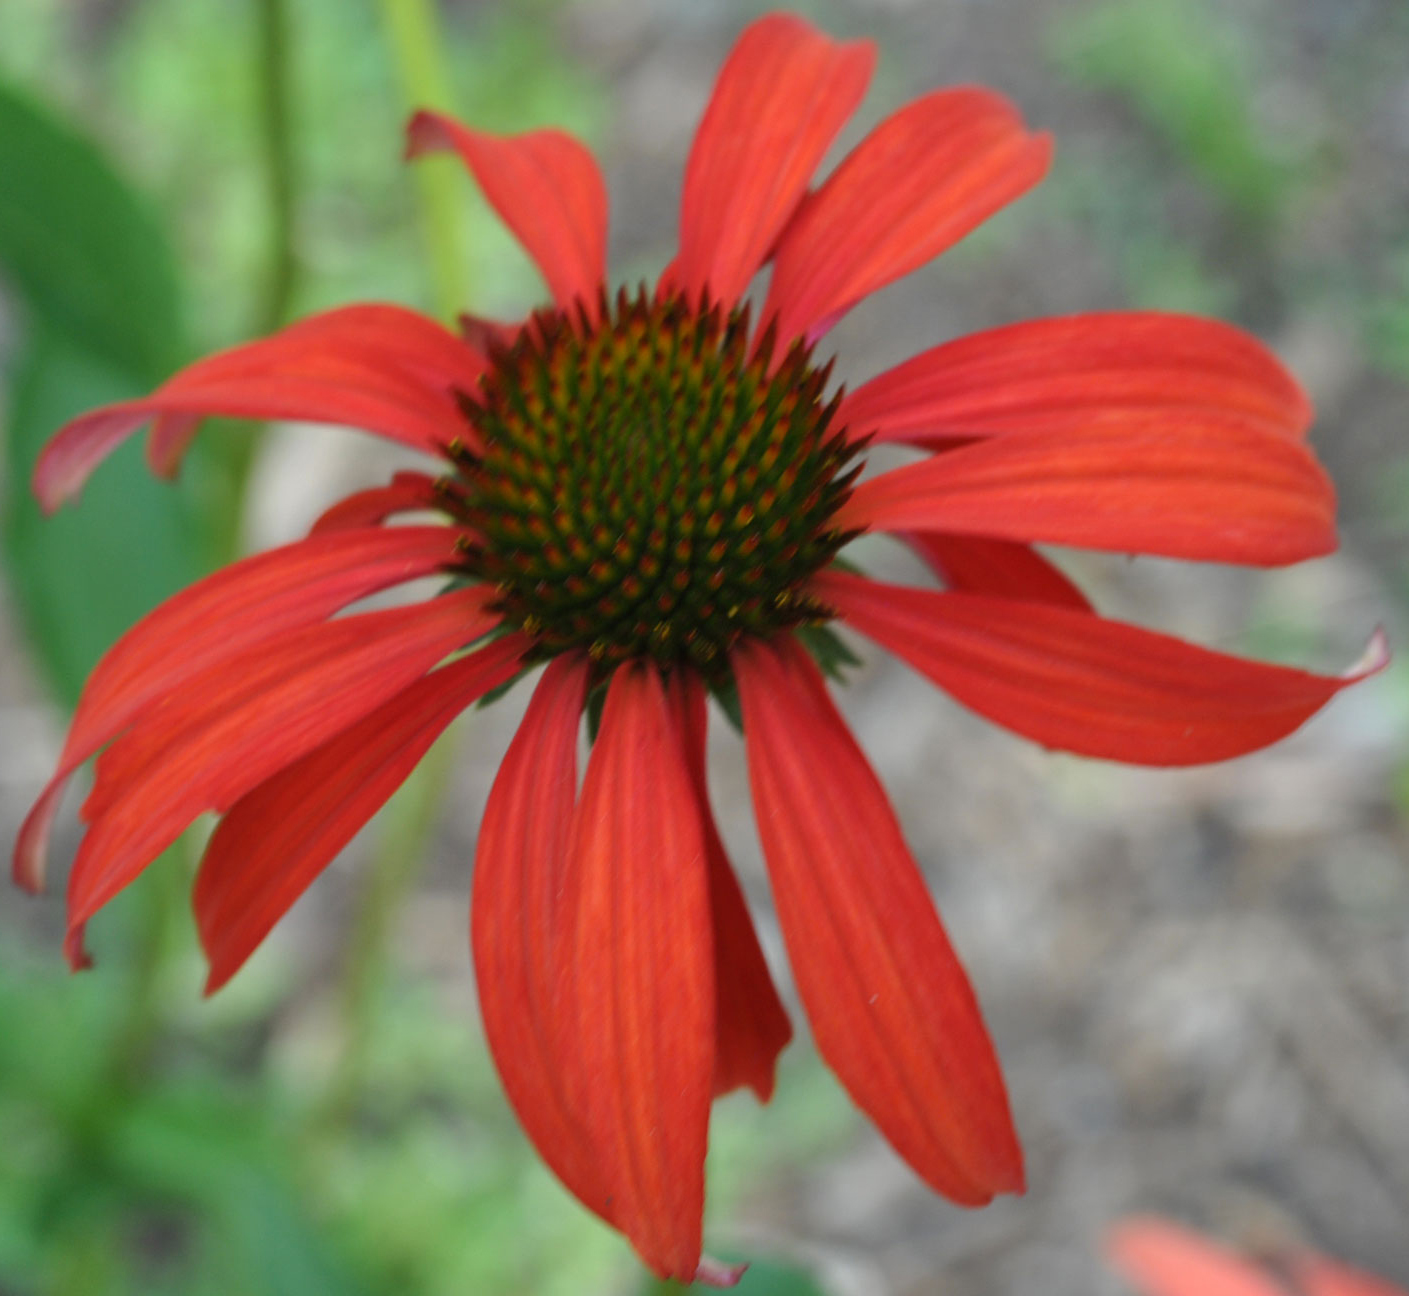 The perfect red in 'Tomato Soup' Coneflower